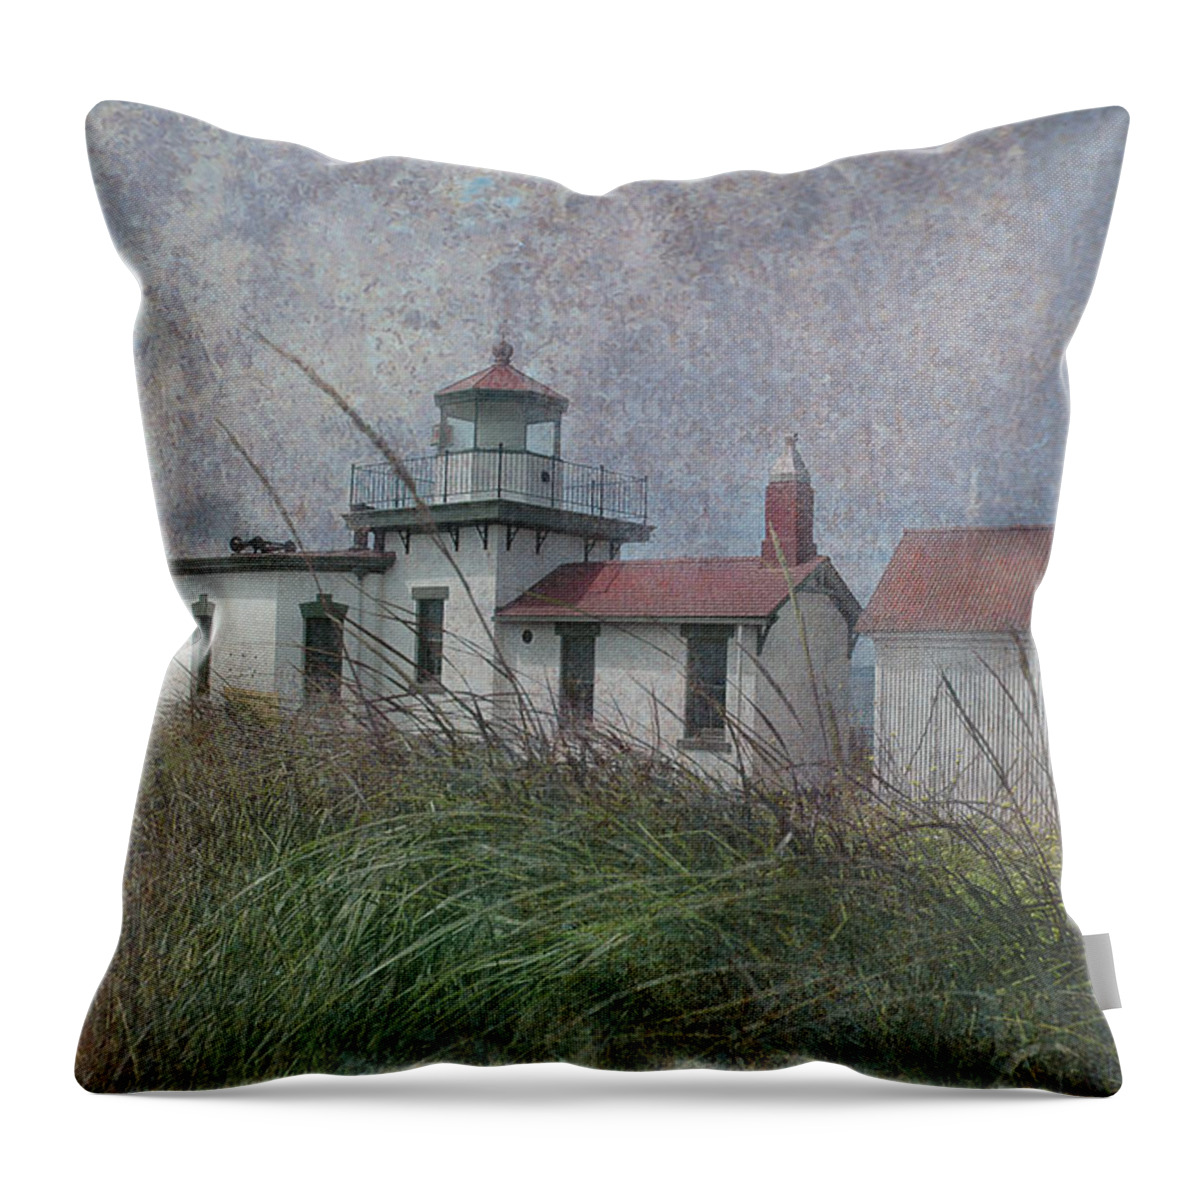 Lighthouse Throw Pillow featuring the photograph West Point Lighthouse - Seattle by Jeff Burgess